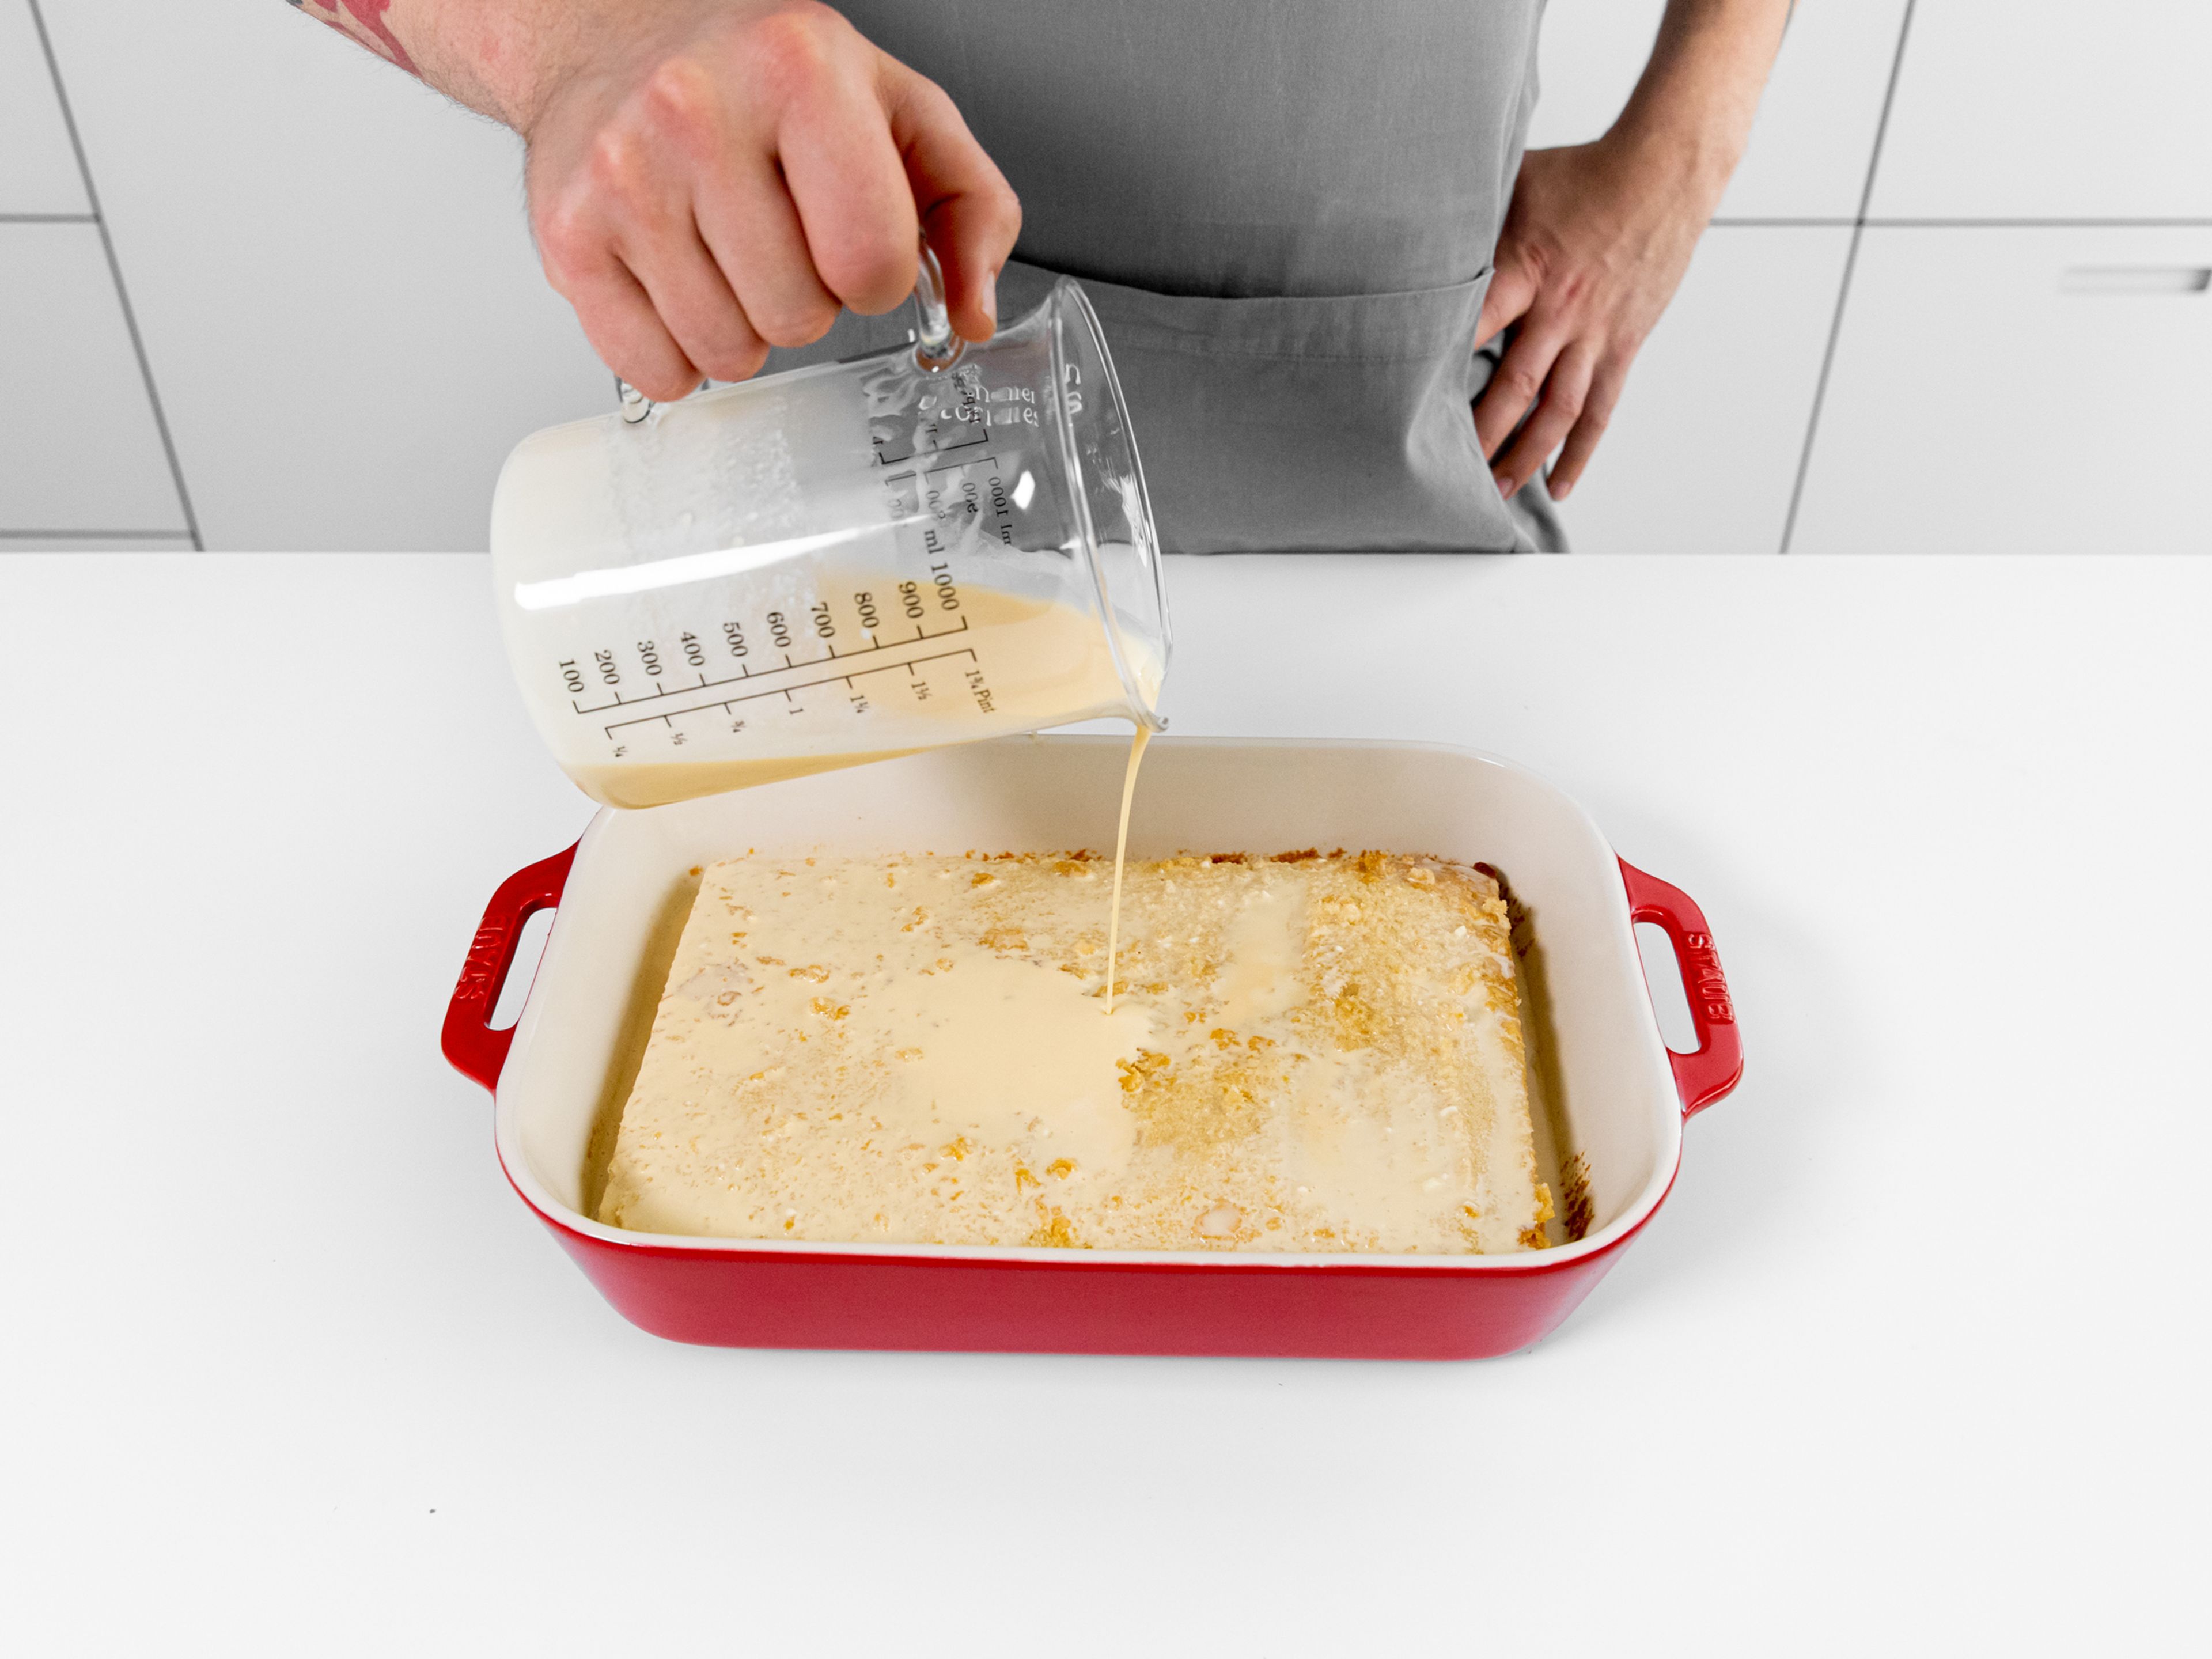 While the cake cools, add condensed milk, evaporated milk, heavy cream, and some vanilla extract to a large bowl and whisk to combine. Level the cake on the top and sides with a knife, then transfer it back to the baking pan. Pour the cake tres leches cake soak over the cake evenly. Cover the pan tightly with plastic and transfer to the fridge to cool for at least 3 hr.